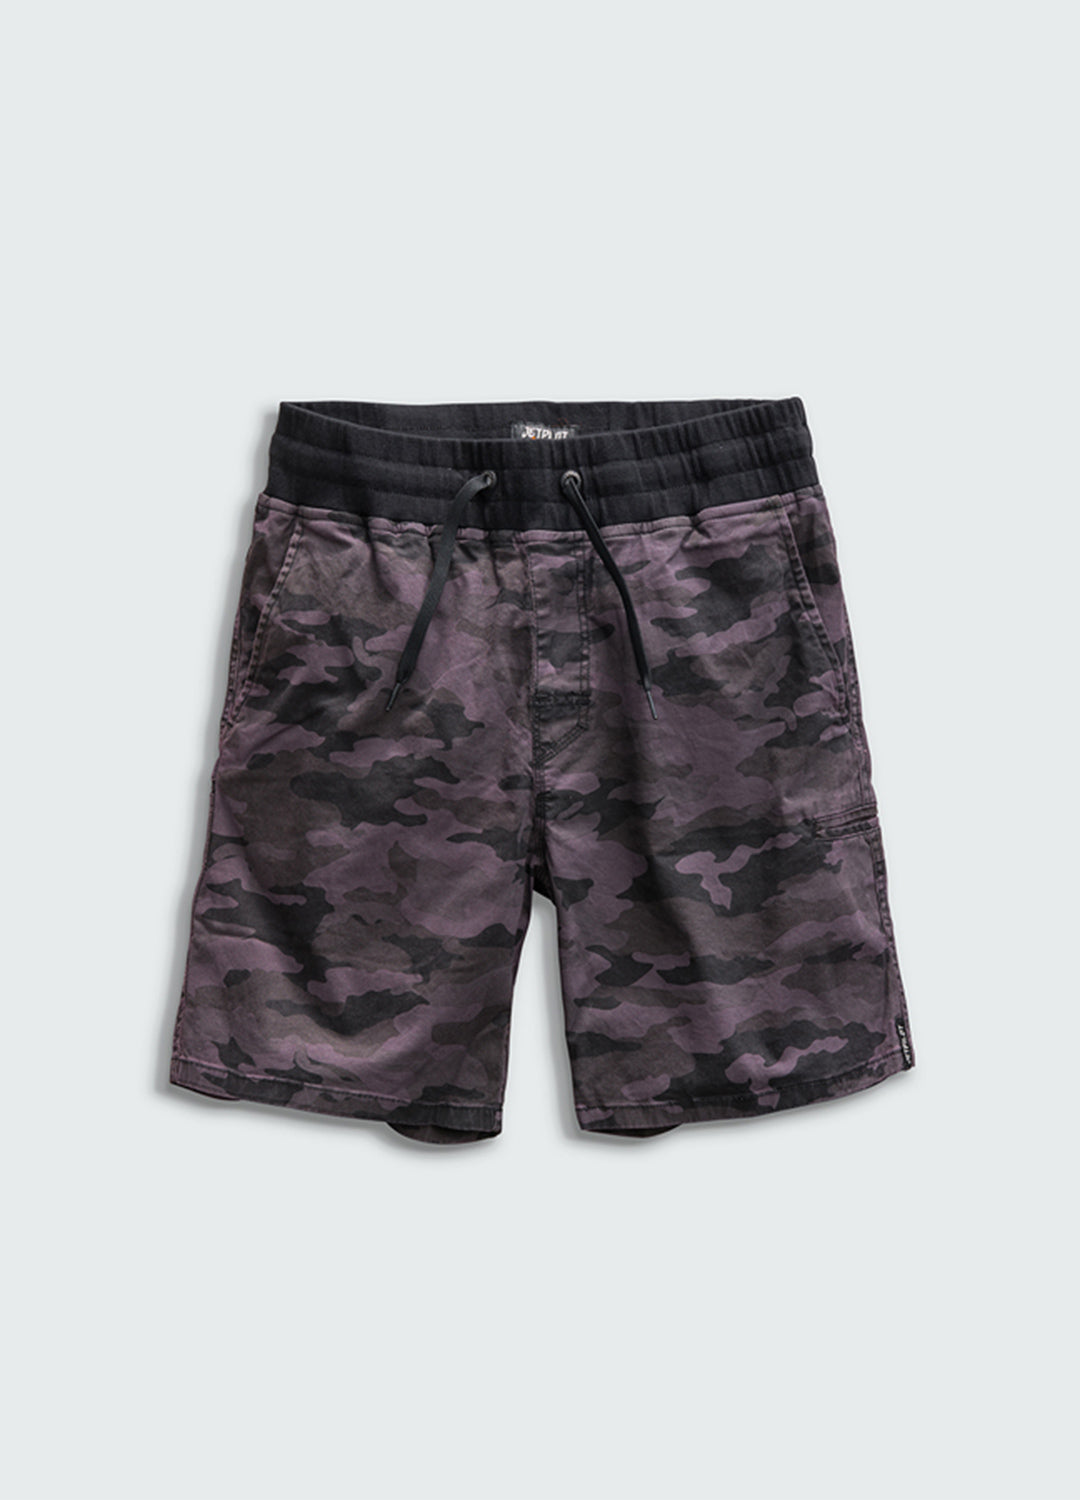 JP Stretched Out Walkshort - Camo